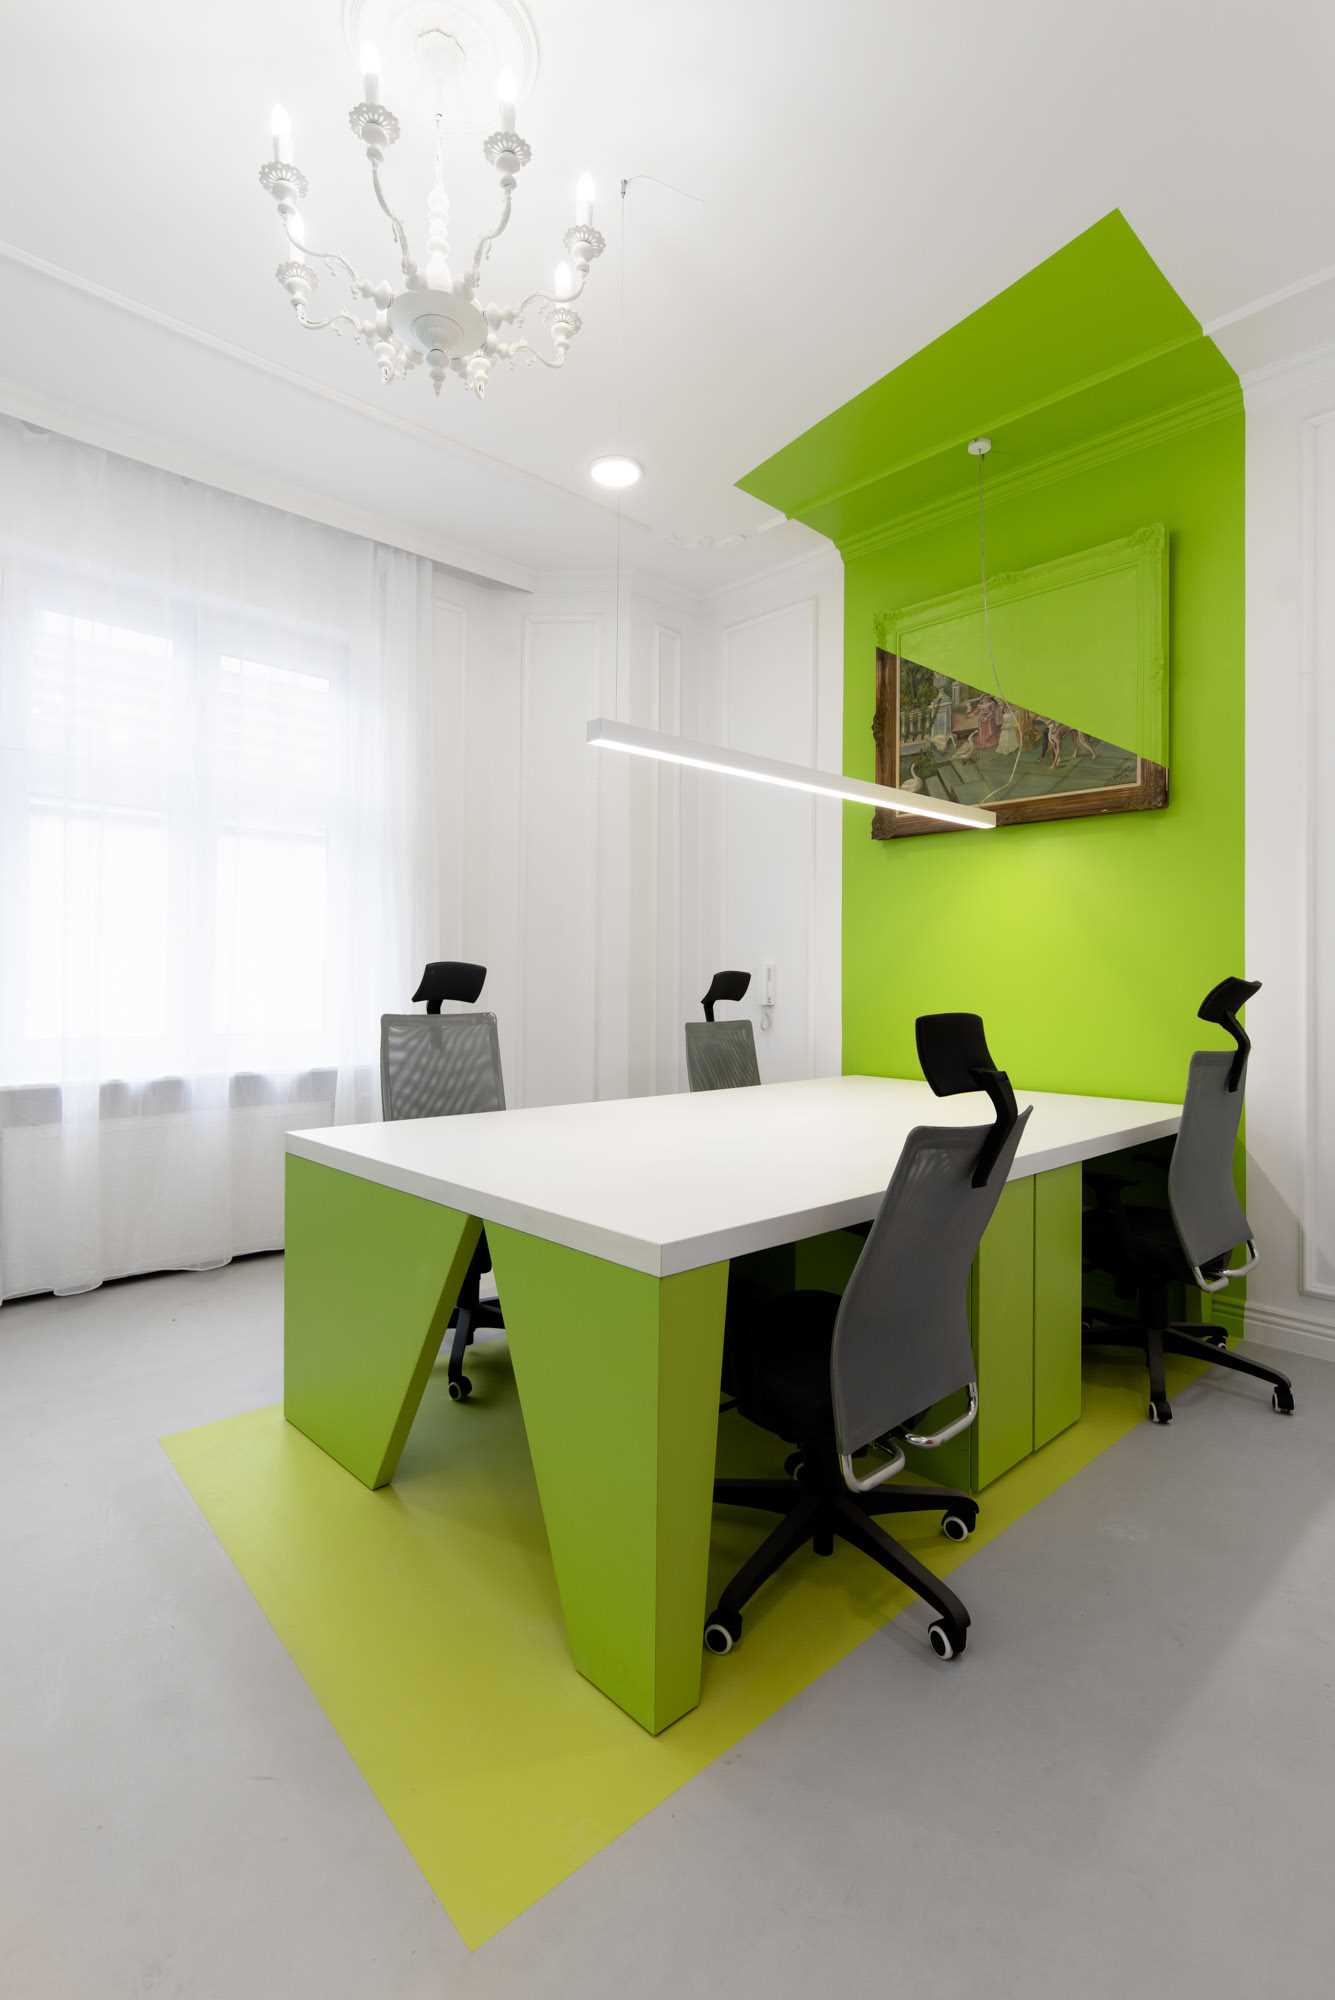 In this office meeting room, the painted walls wrapping from the ceiling, down the wall, and onto the floor, designating the space for the meeting tables and work areas.